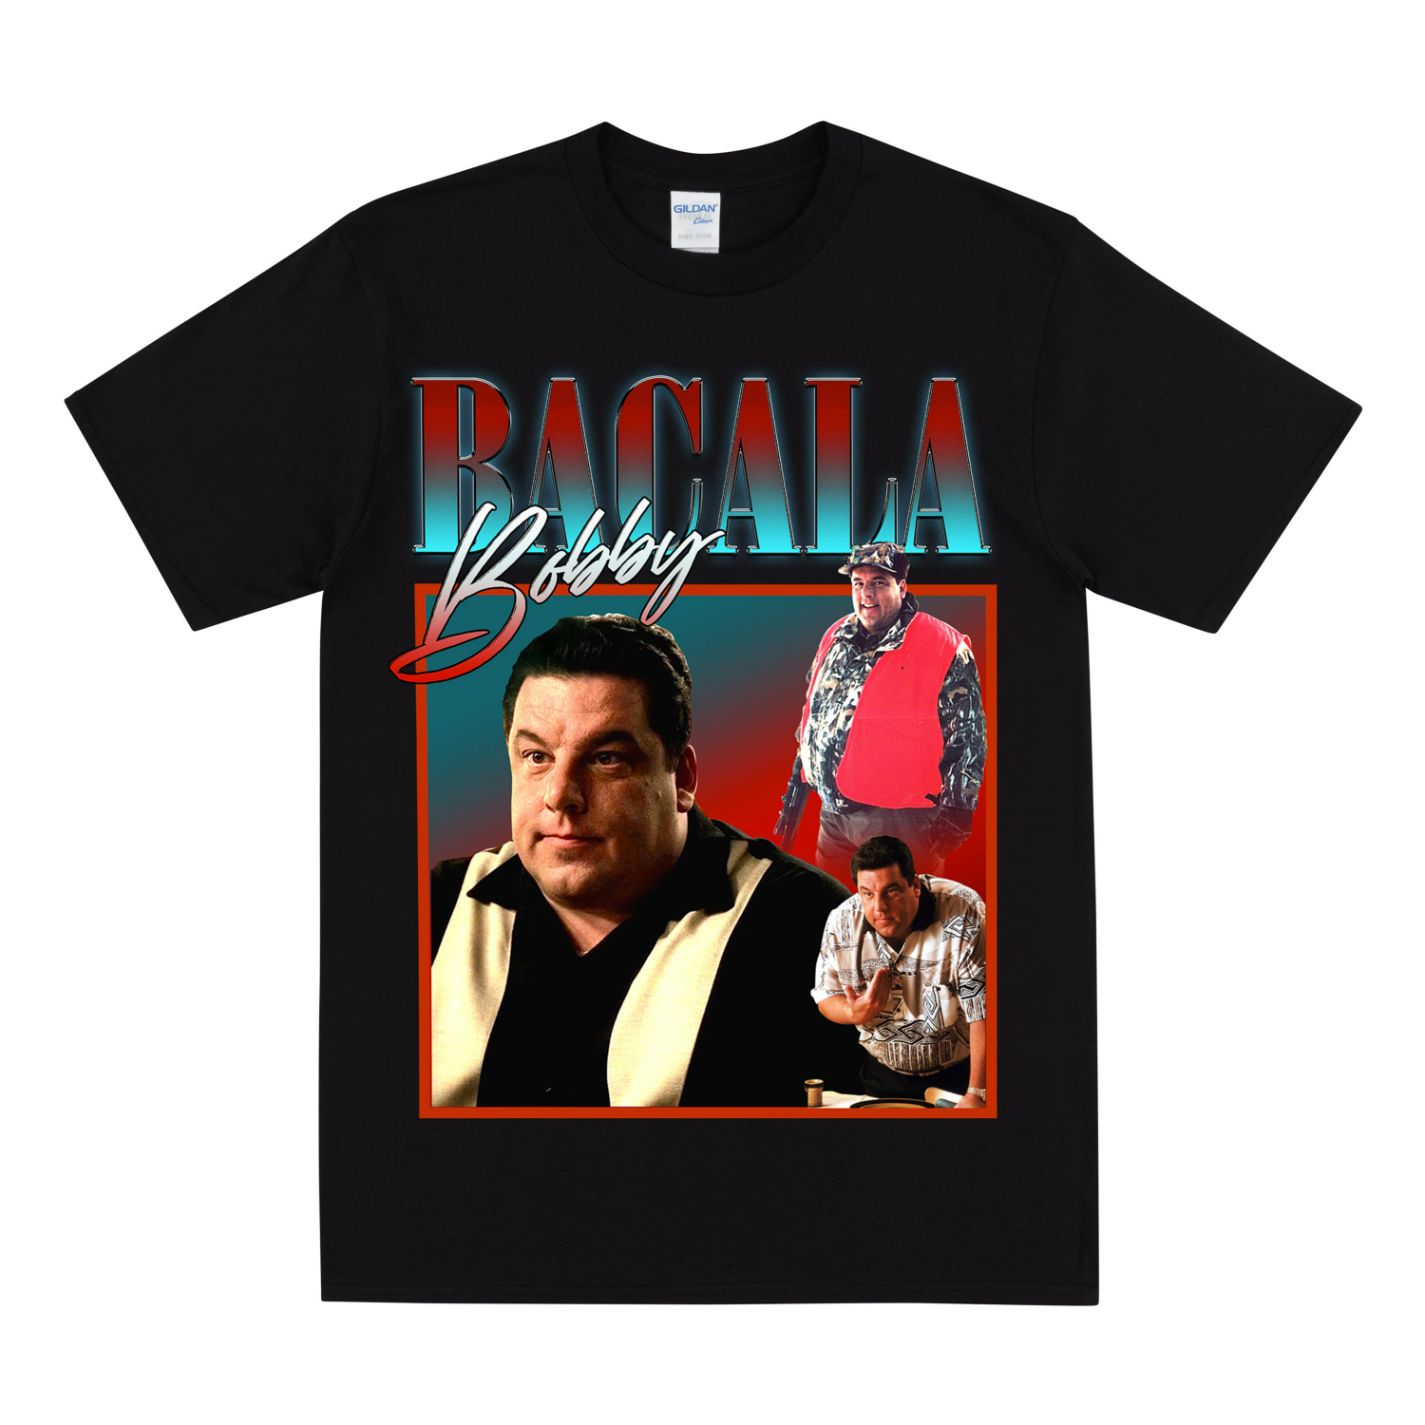 BACALA From THE SOPRANOS Homage T-Shirt